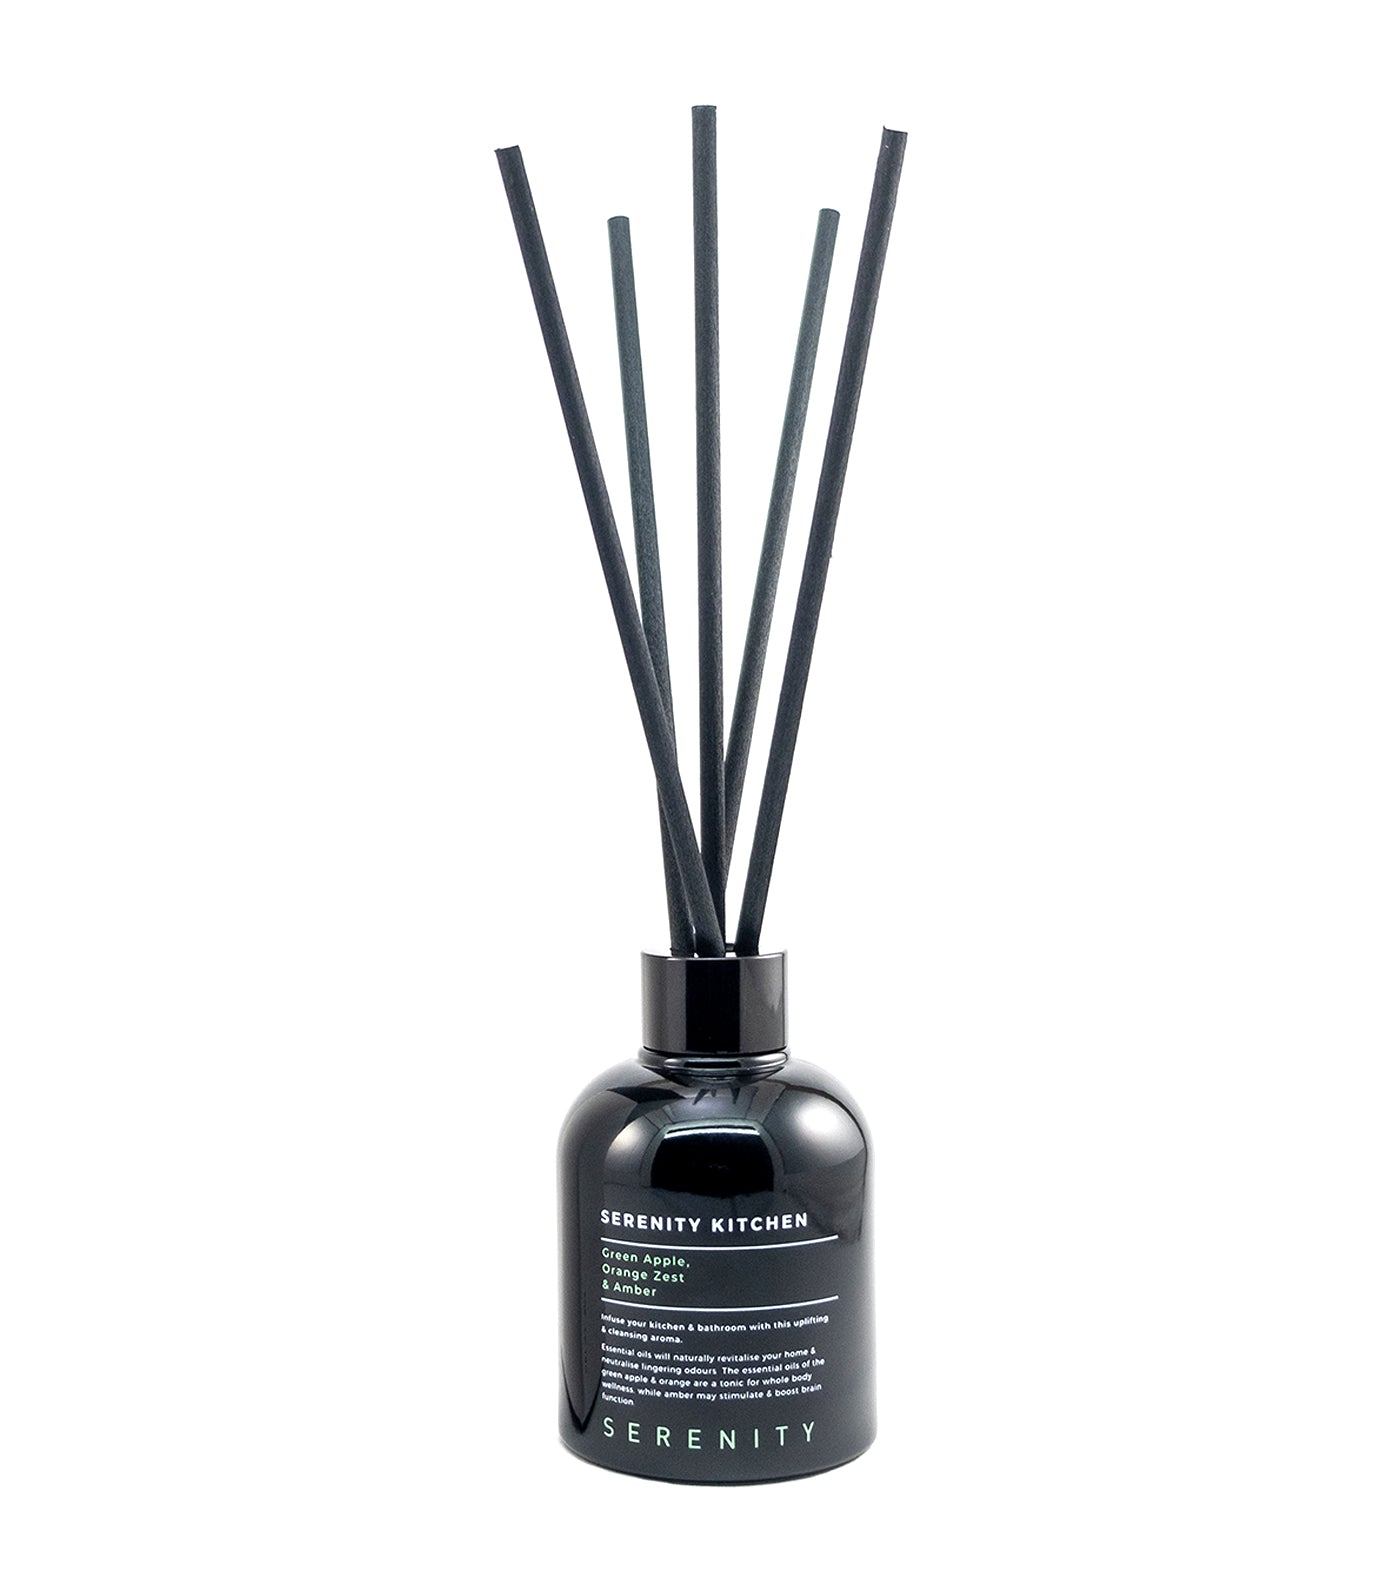 serenity green apple, orange zest, and amber reed diffuser